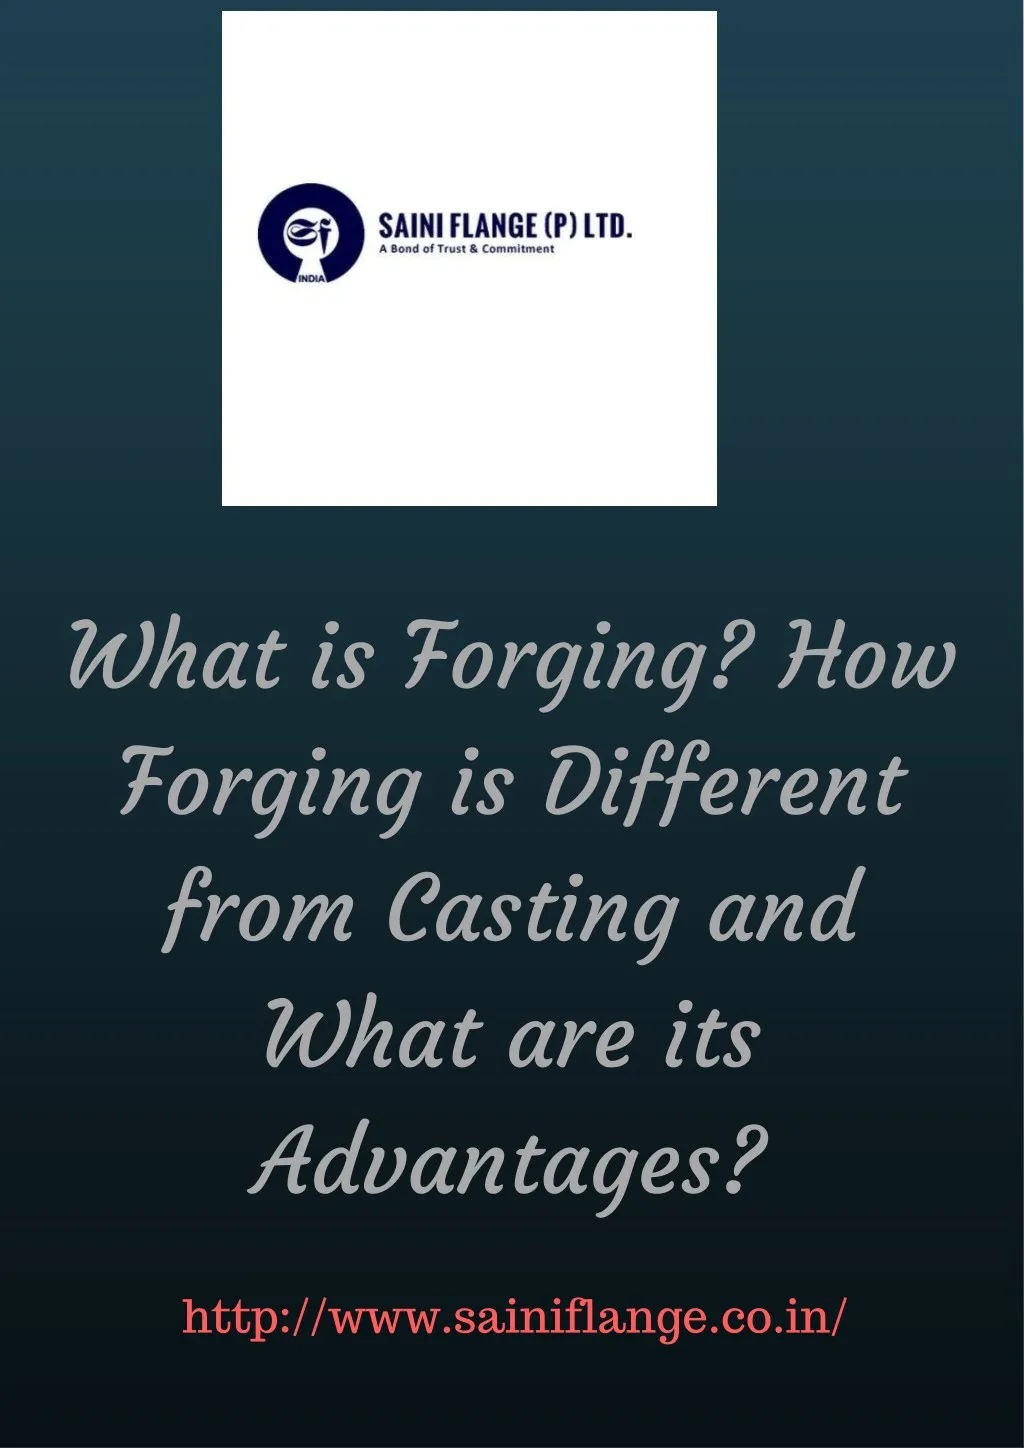 what is forging how forging is different from